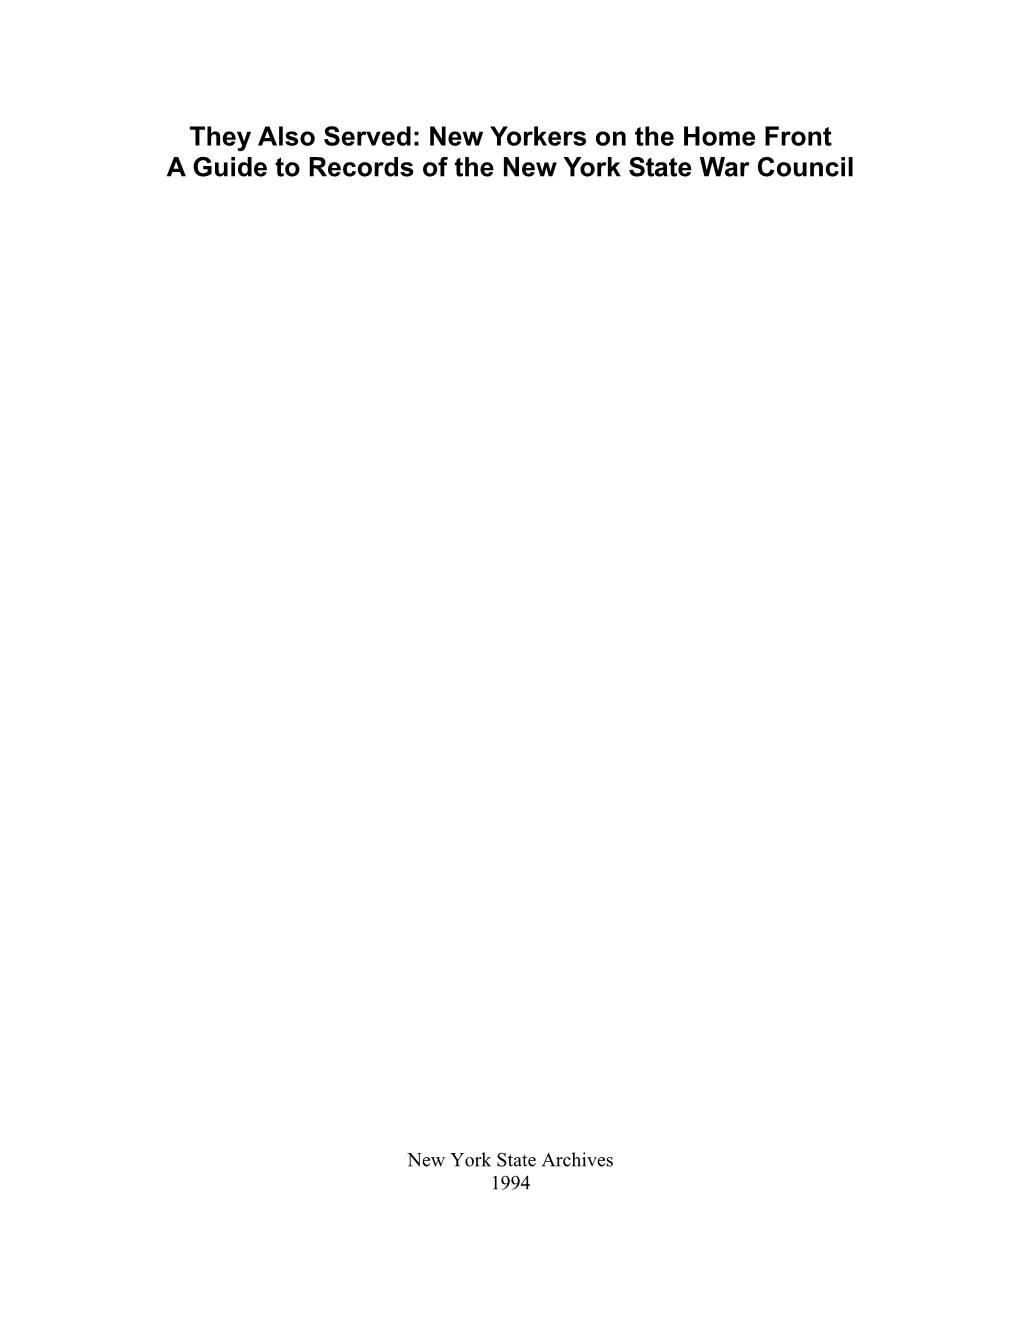 They Also Served: New Yorkers on the Home Front: a Guide to Records Of